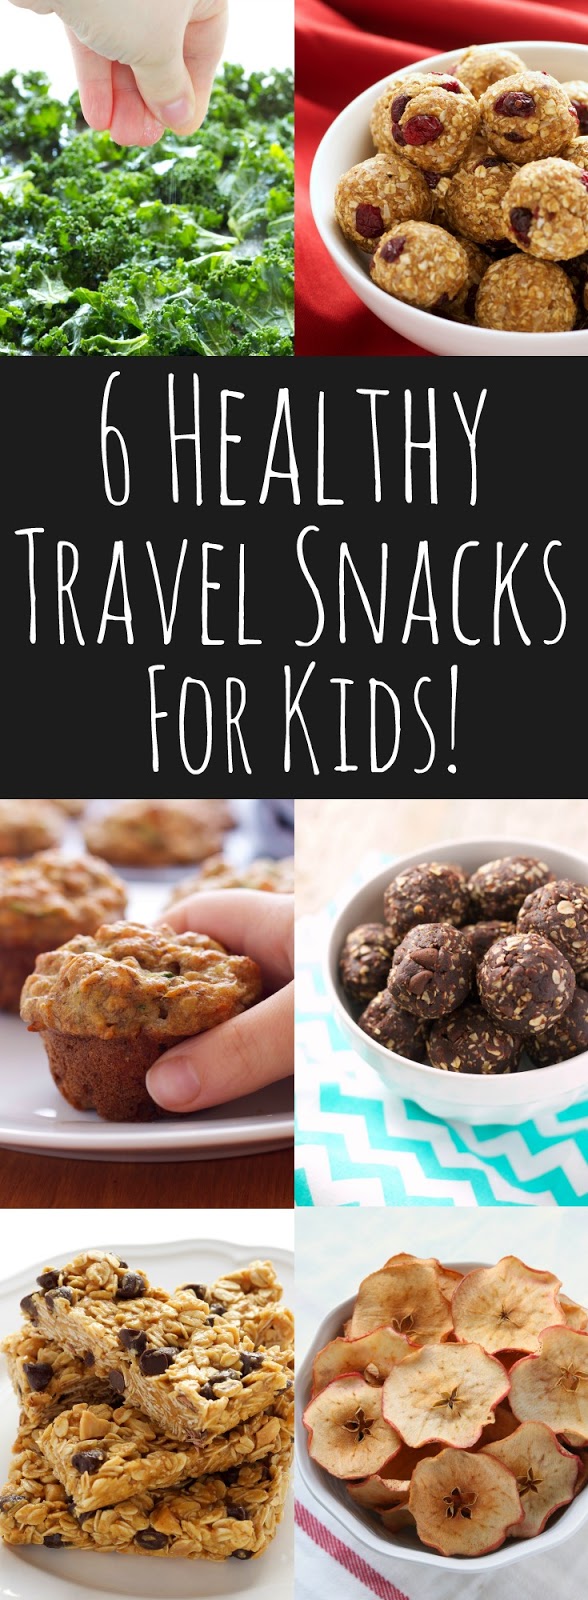 what are good travel snacks for toddlers